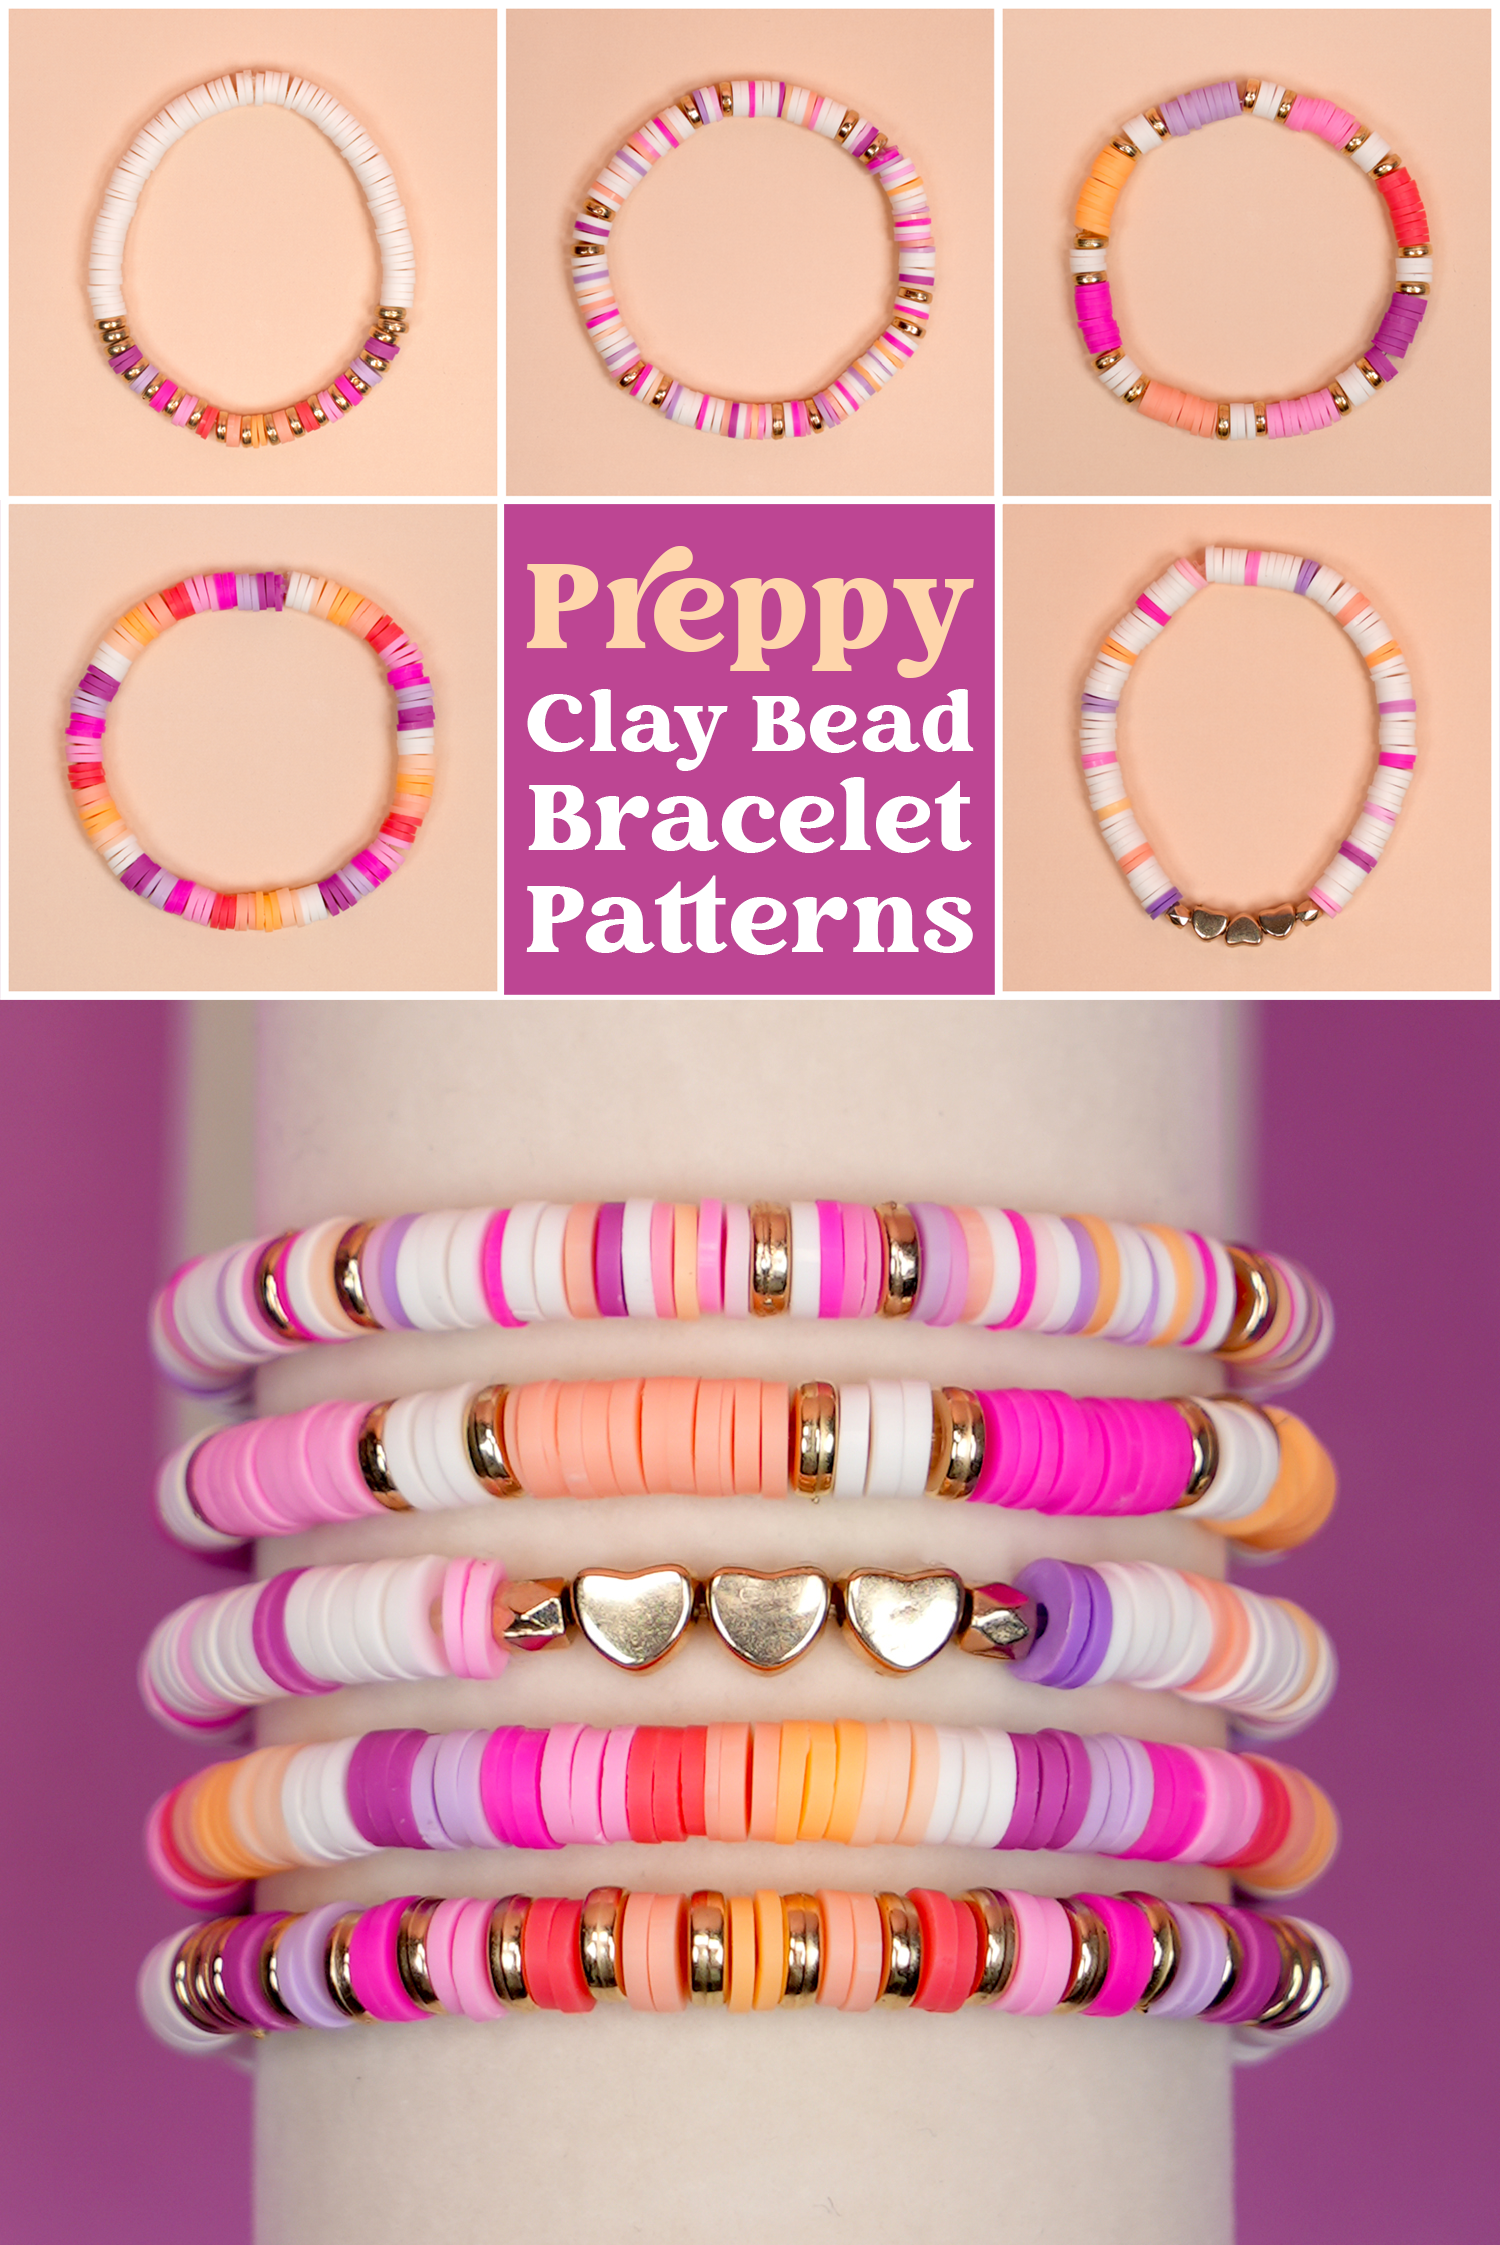 Preppy Clay Bead Bracelet Ideas & How-to Tutorial - Happiness is Homemade